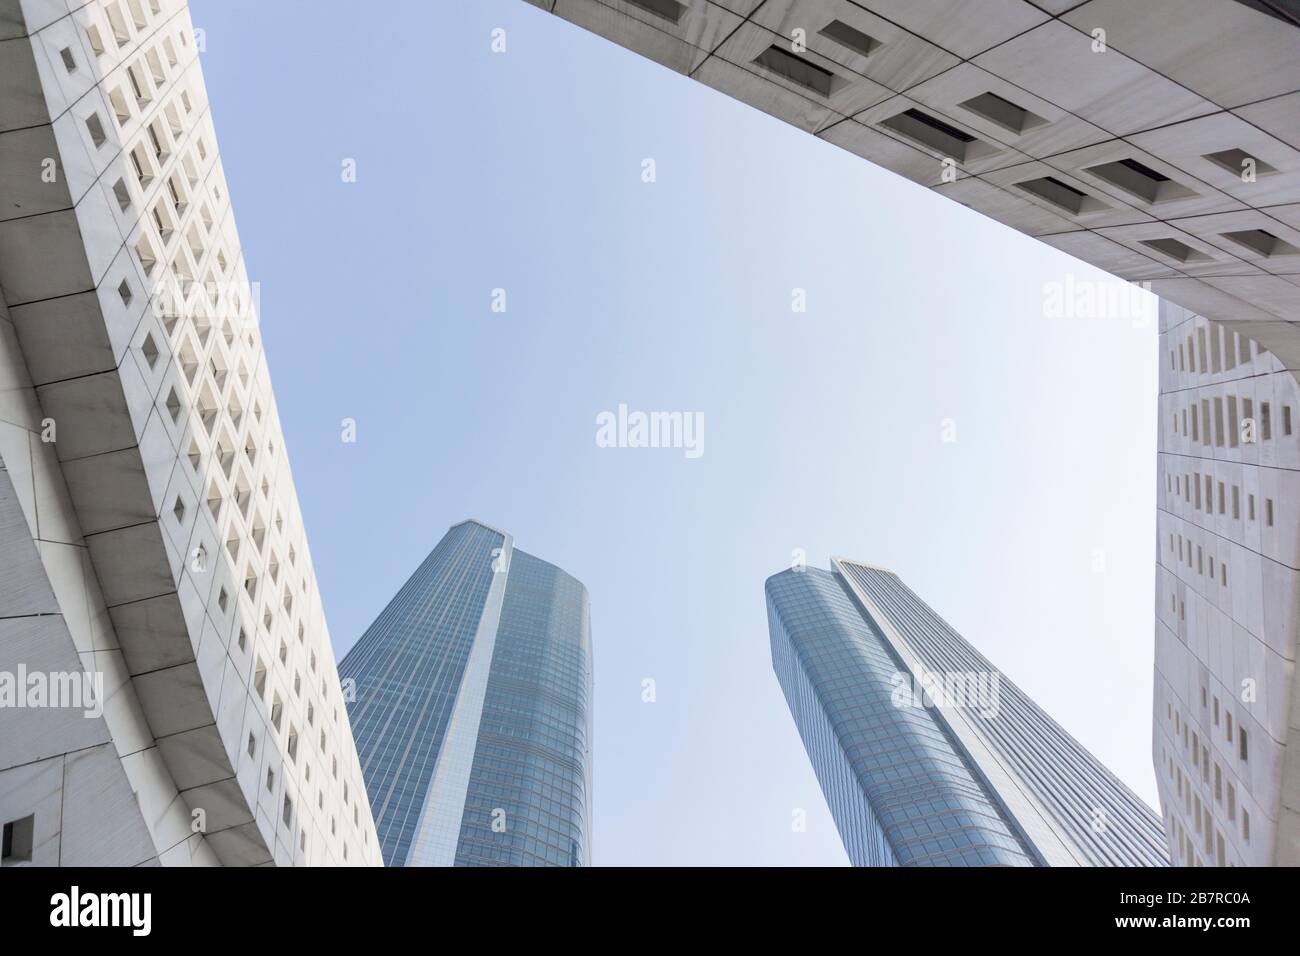 Nanjing, China-December 23, 2018:Nanjing international youth culture center, which is designed by Zaha Hadid Architects. Stock Photo